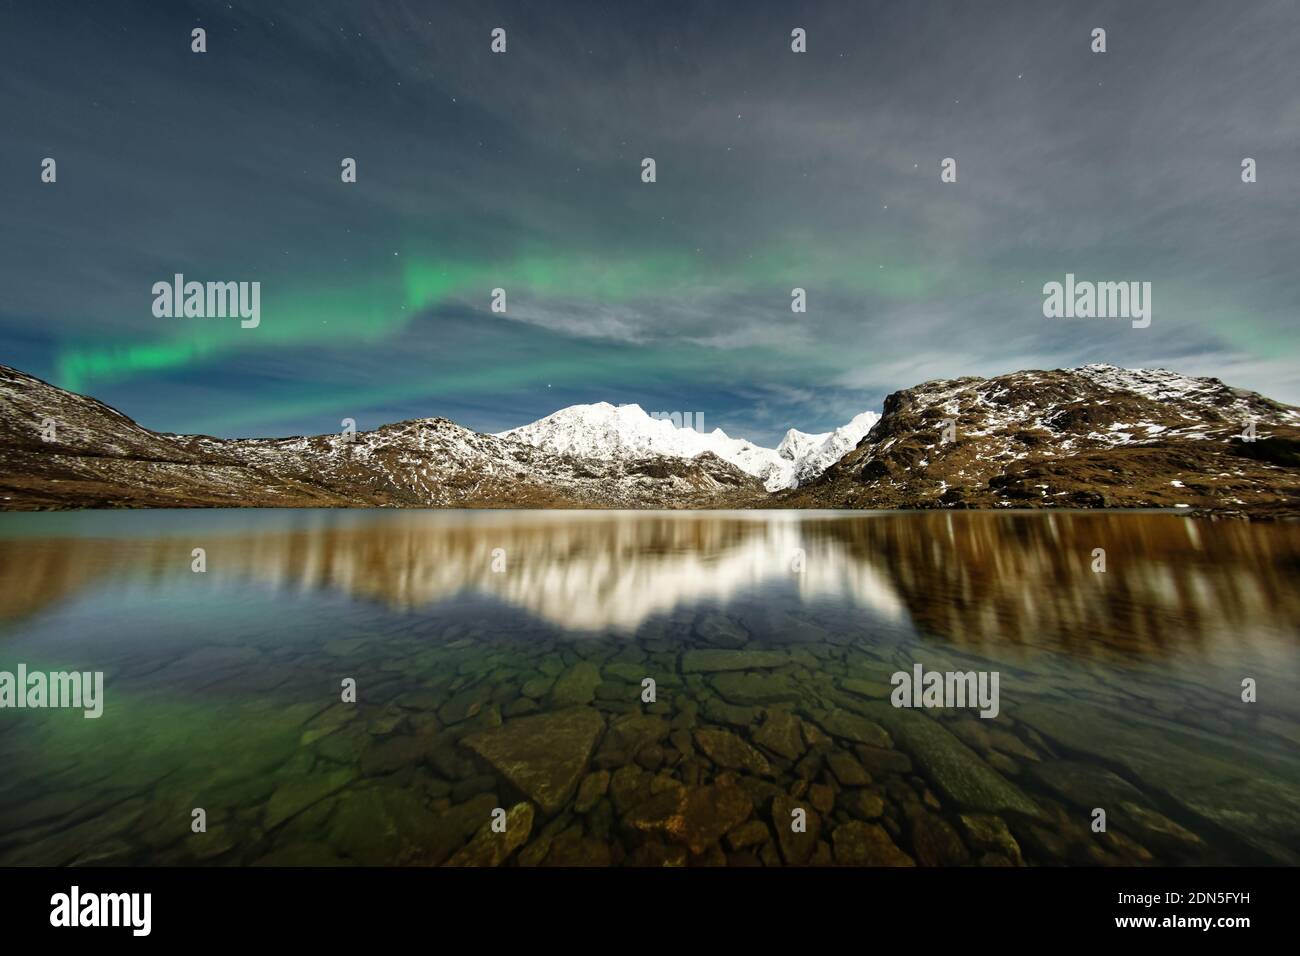 Northern lights over a mountain range reflected in a lake - Location: Norway, Lofoten Stock Photo